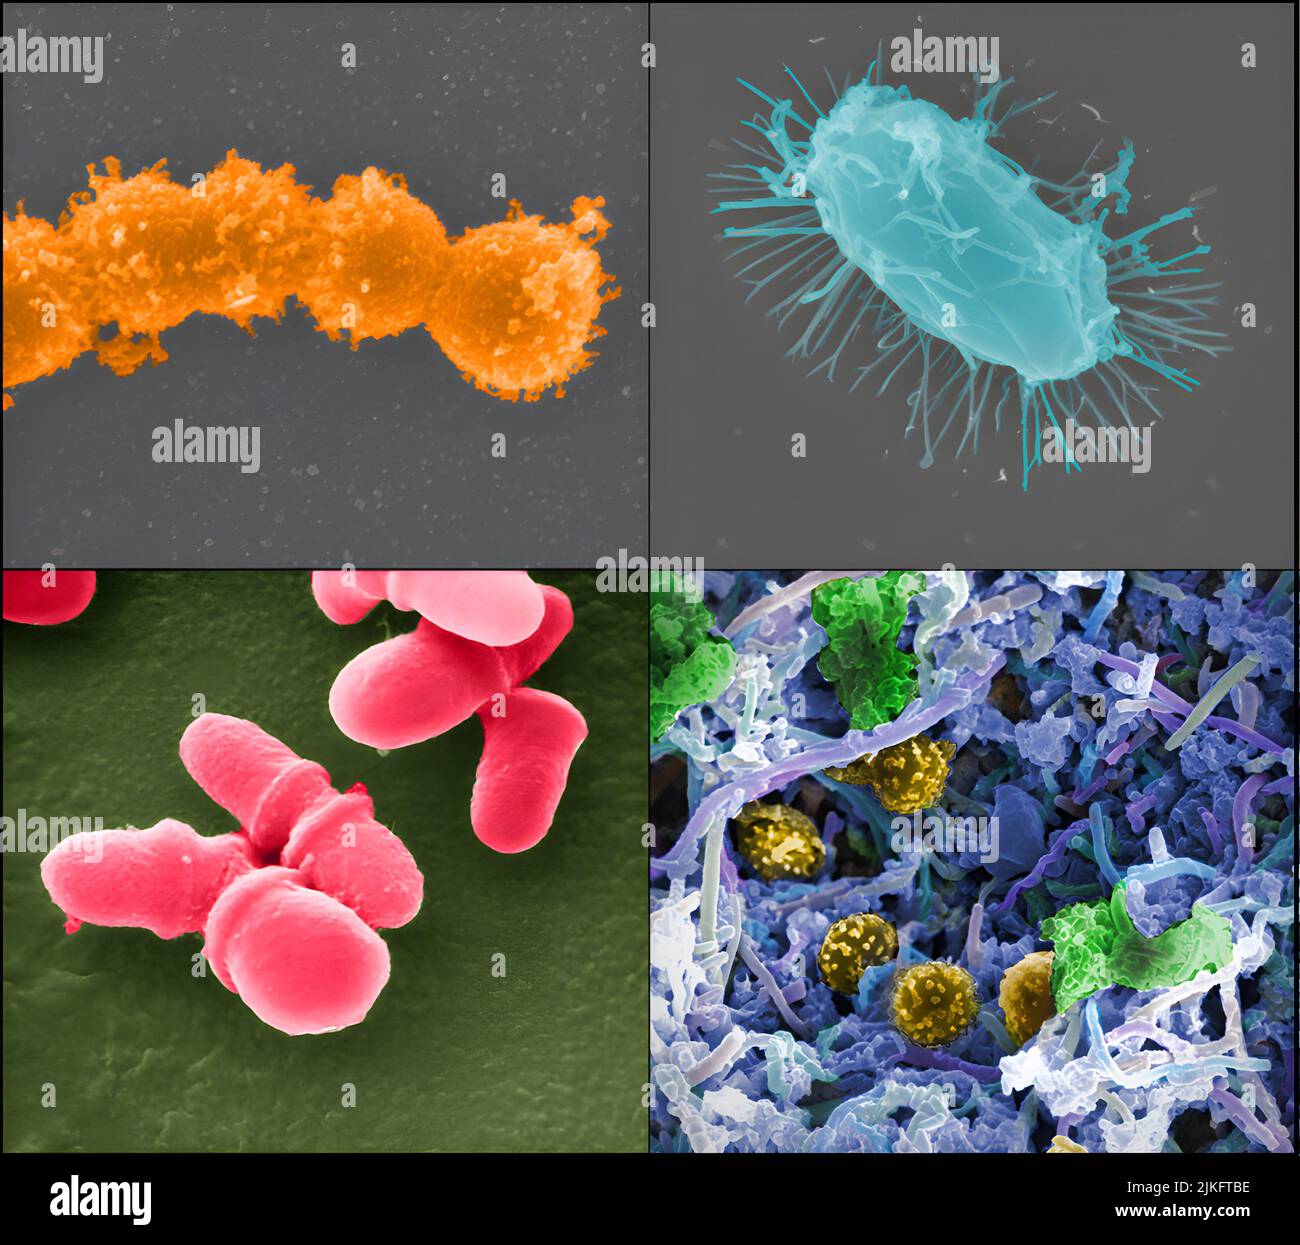 The Human Microbiome Project, which was launched by the NIH in 2007, provided the first insight into the microbial life of healthy humans and explores possible relationships between particular human diseases and the microbiome. (Clockwise from top left): Streptococcus (Credit: Tom Schmidt) Mixed species microbial biofilm, from the human body (Credit: A. Earl, Broad Institute/MIT) Bacillus (Credit : Tom Schmidt) Malassezia lopophilis (Credit: JH Carr, CDC). Stock Photo